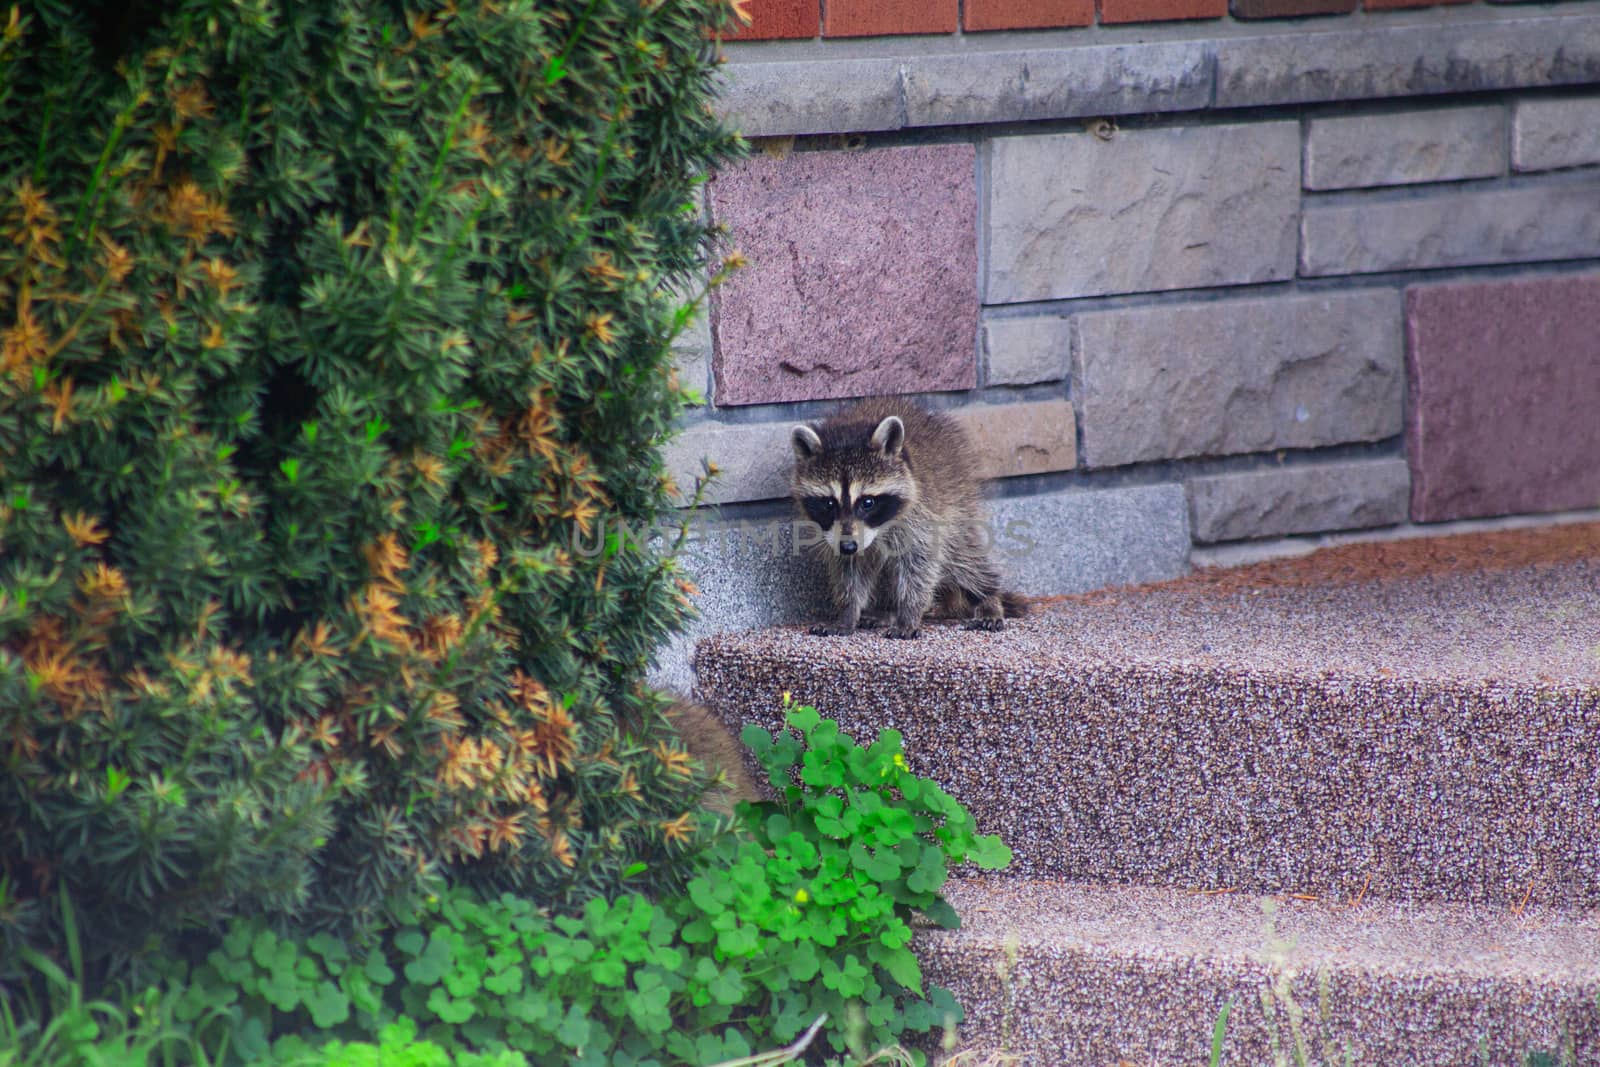 Baby racoon on porch by mypstudio